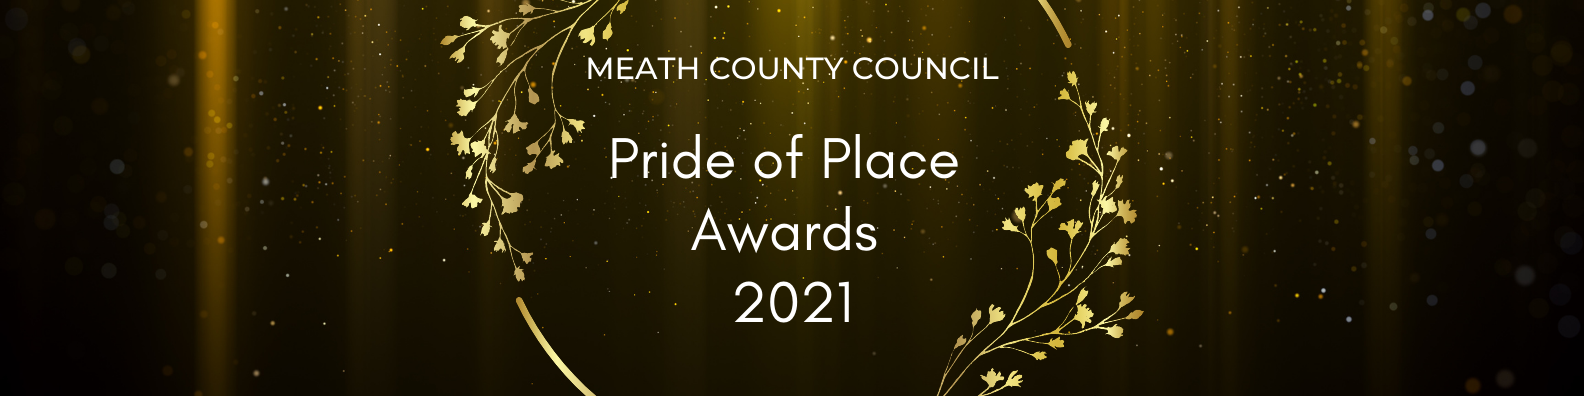 Pride of Place Awards 2021 Page Header